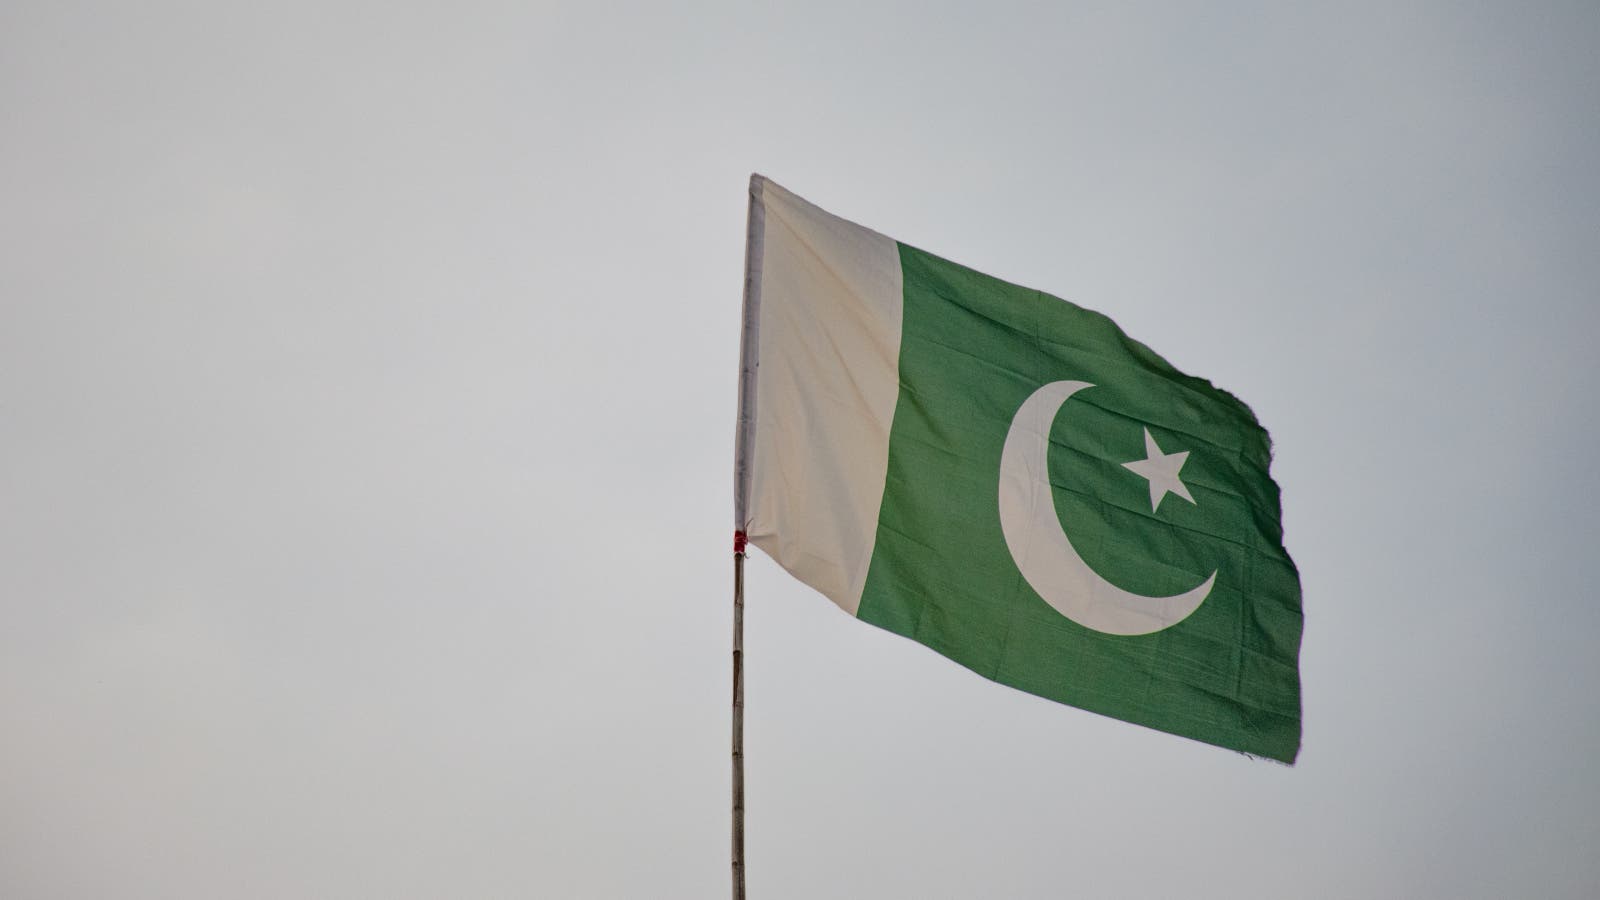 The flag of Pakistan flying high.